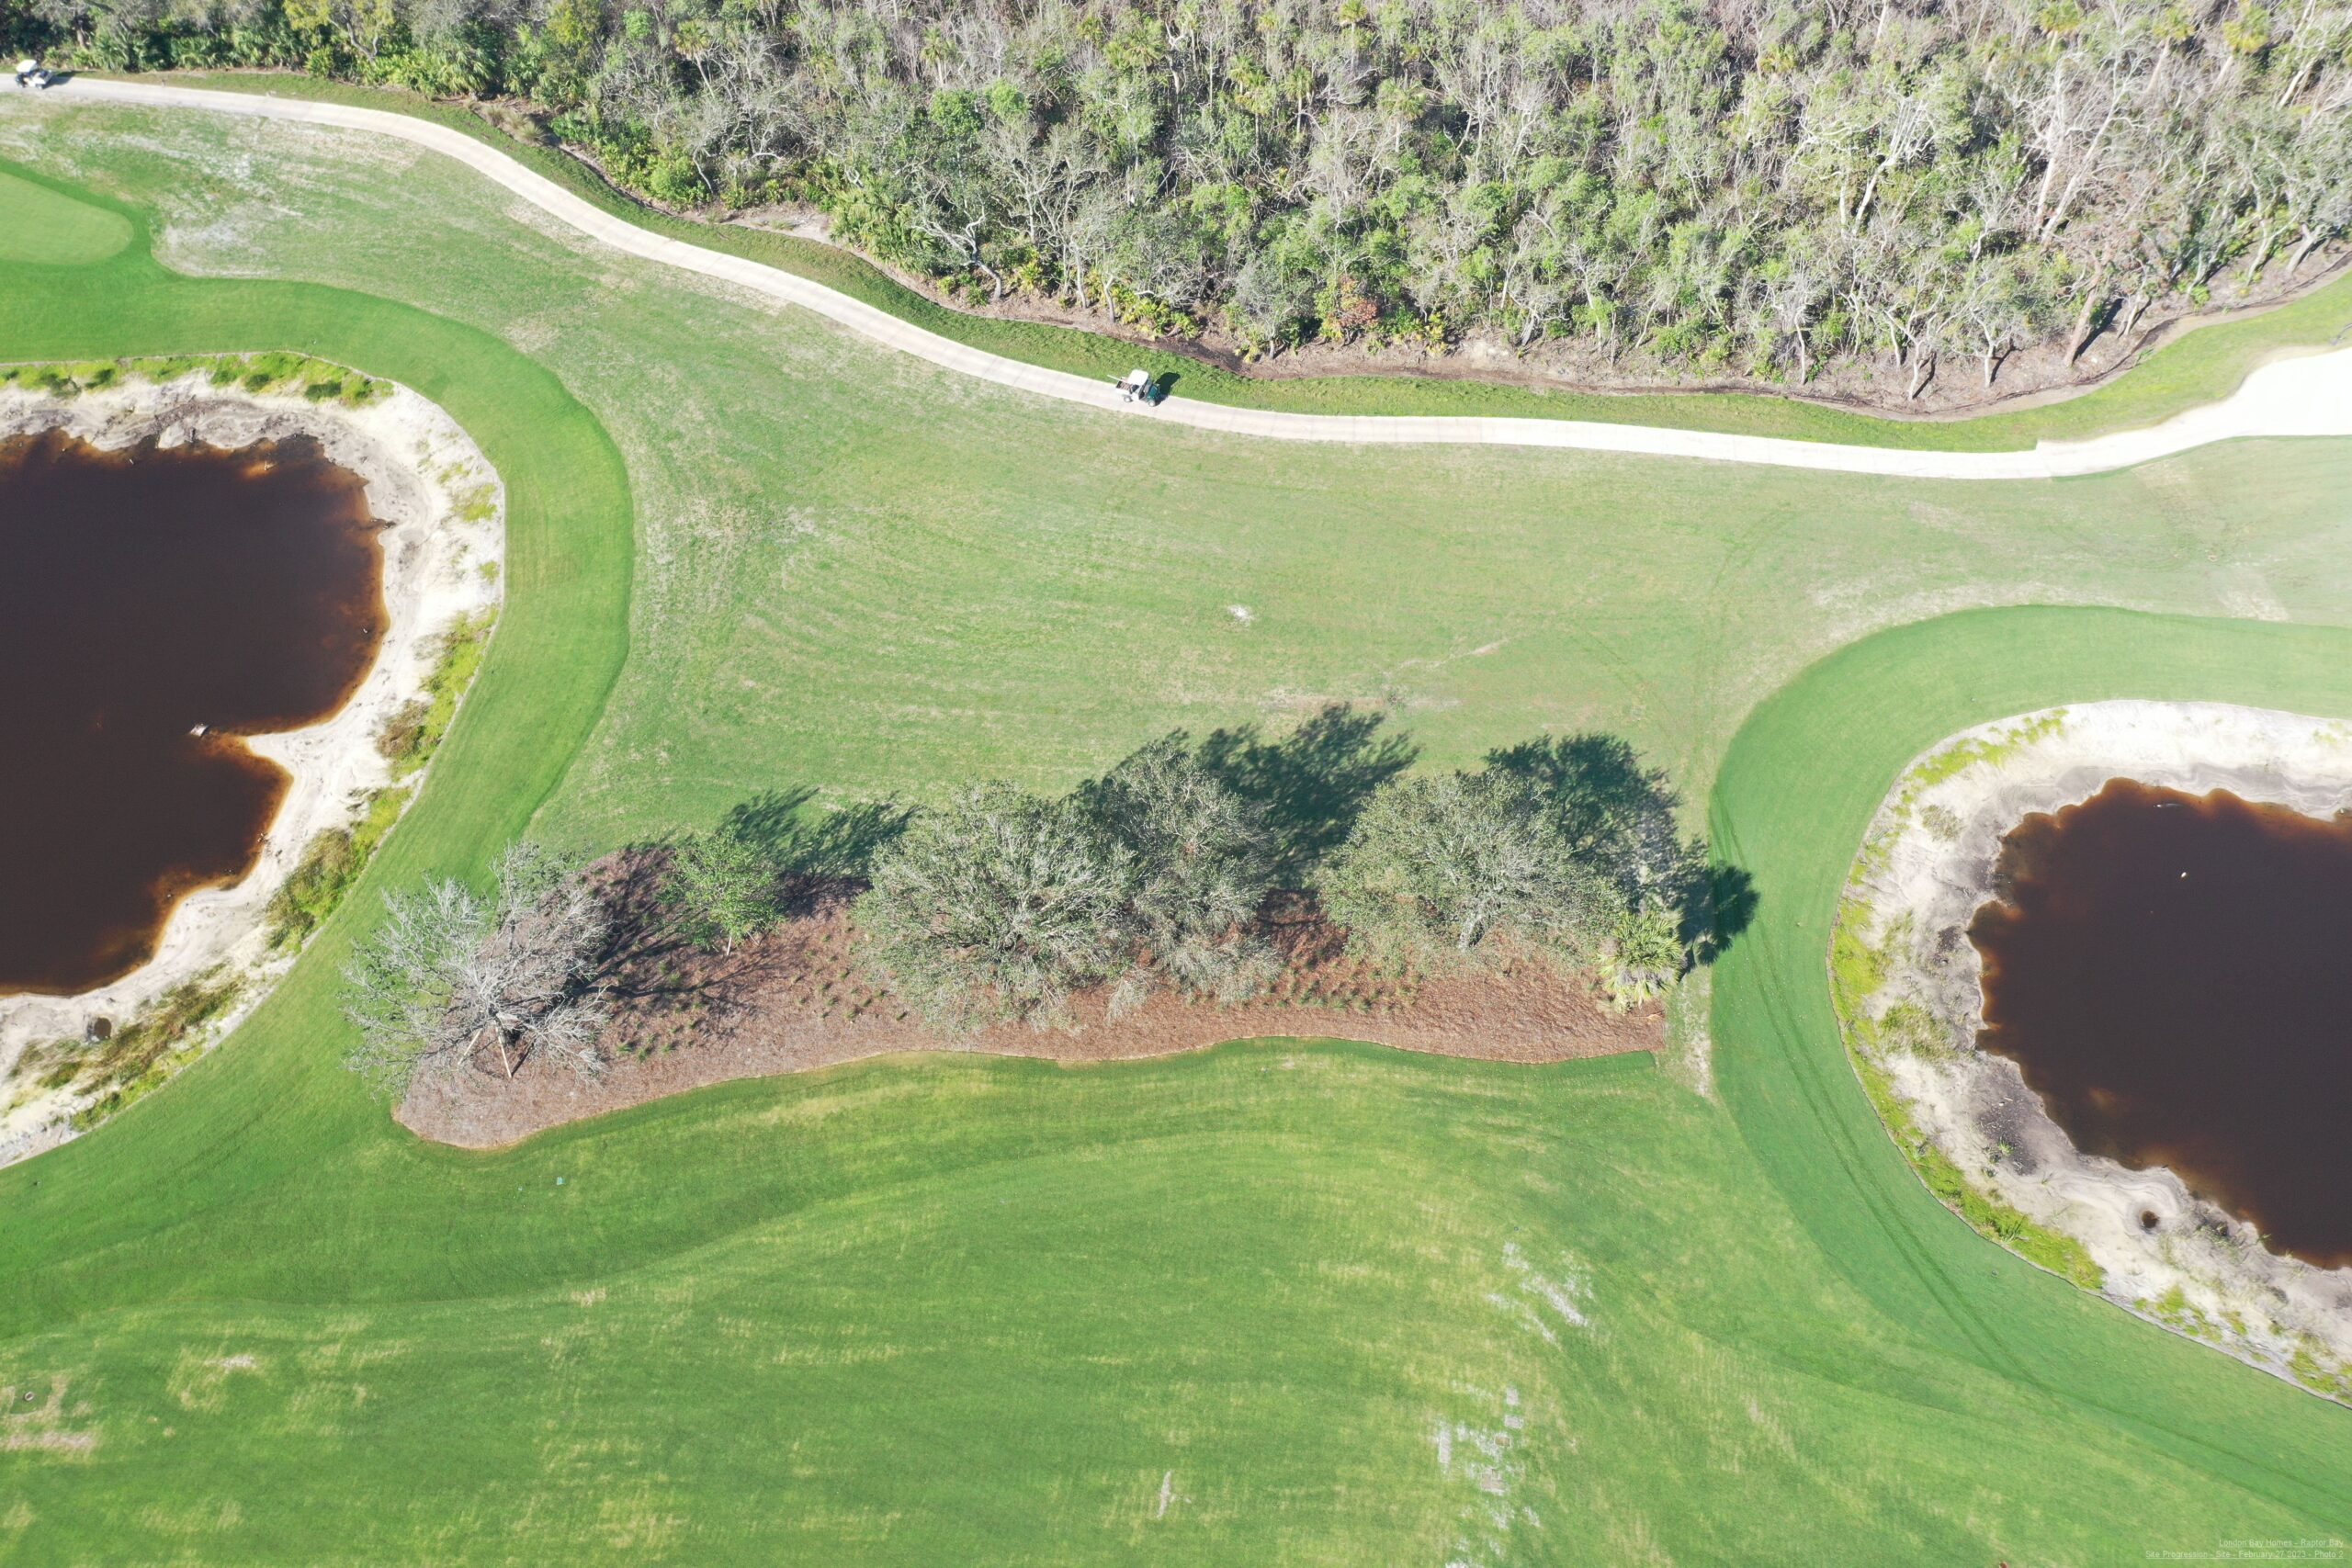 An aerial view of the Saltleaf Golf Preserve, a championship golf course in Bonita Springs, featuring two ponds.